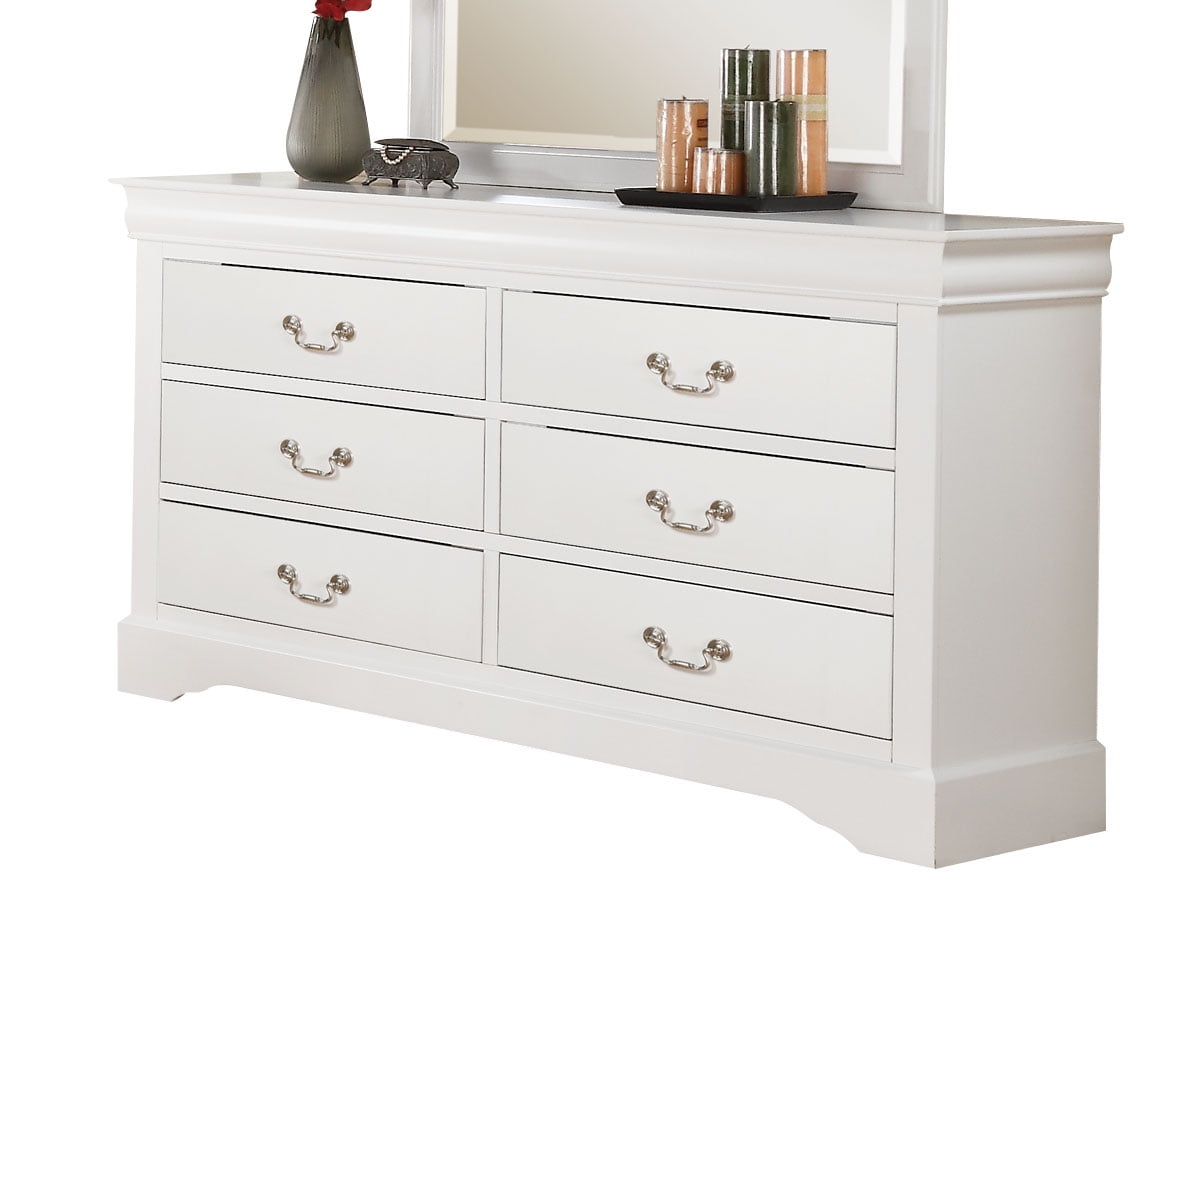 Acme Furniture Louis Philippe Cherry Dresser with Mirror 2375455